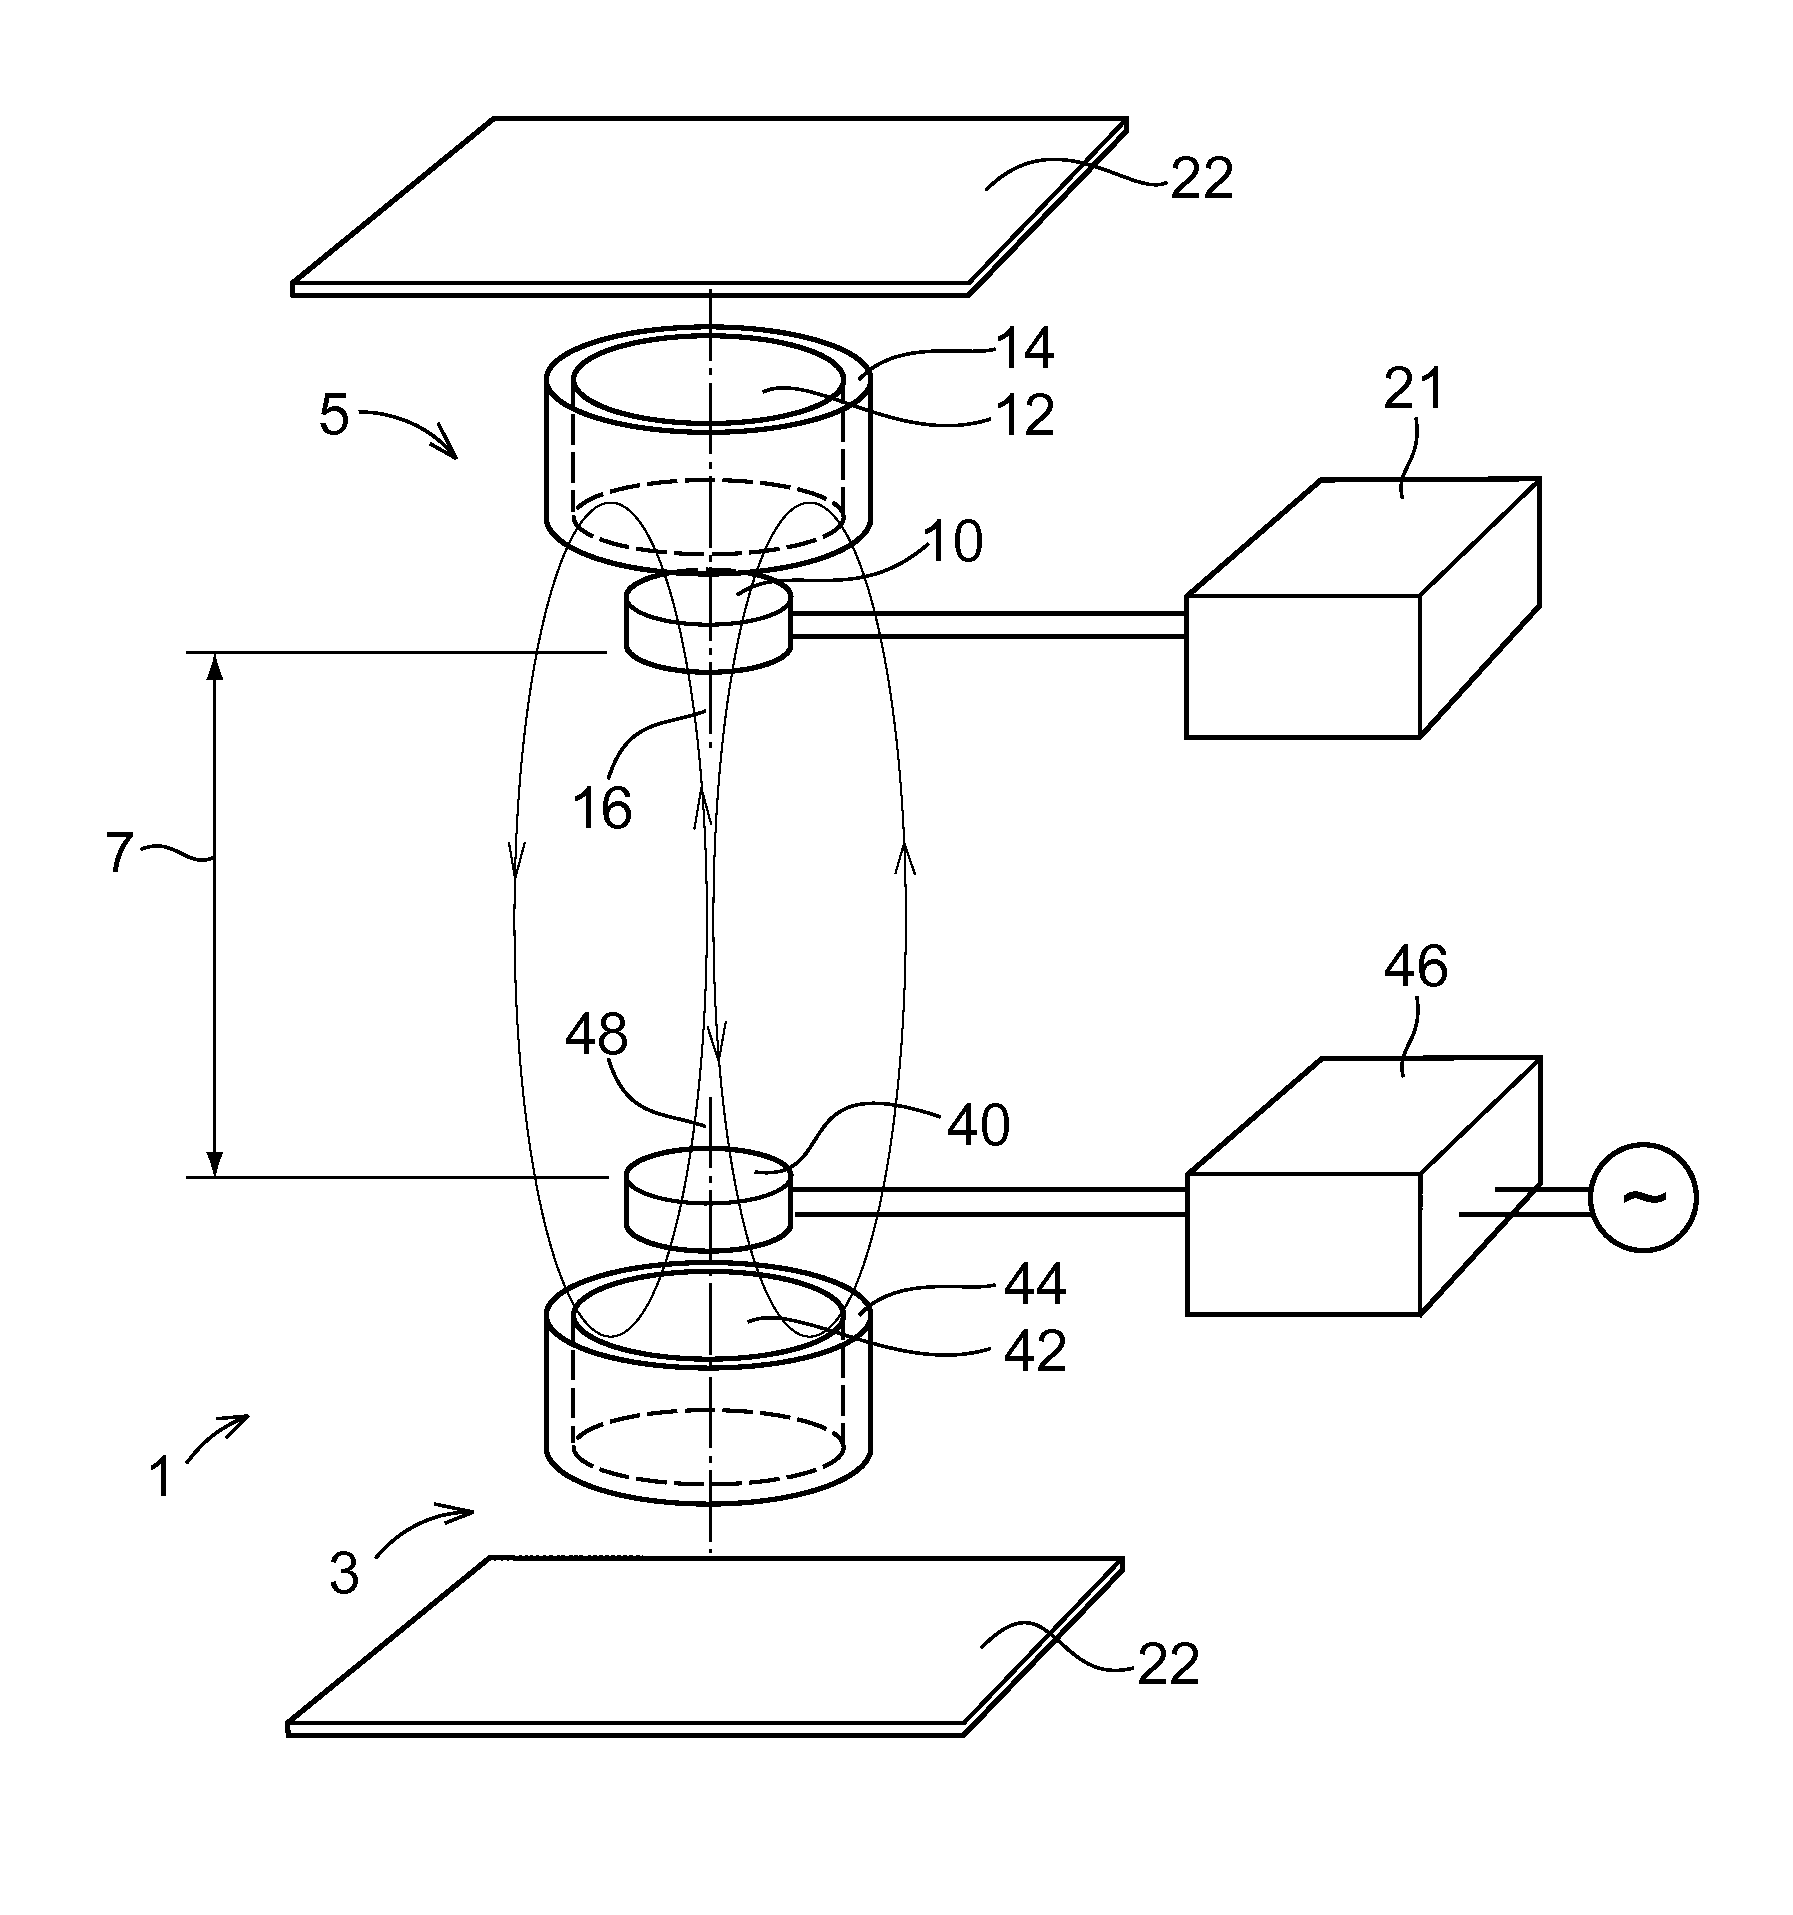 Wireless power receiving unit or wireless power transferring unit with guide member providing magnetic permeability transition between a concentrator core and surrounding medium